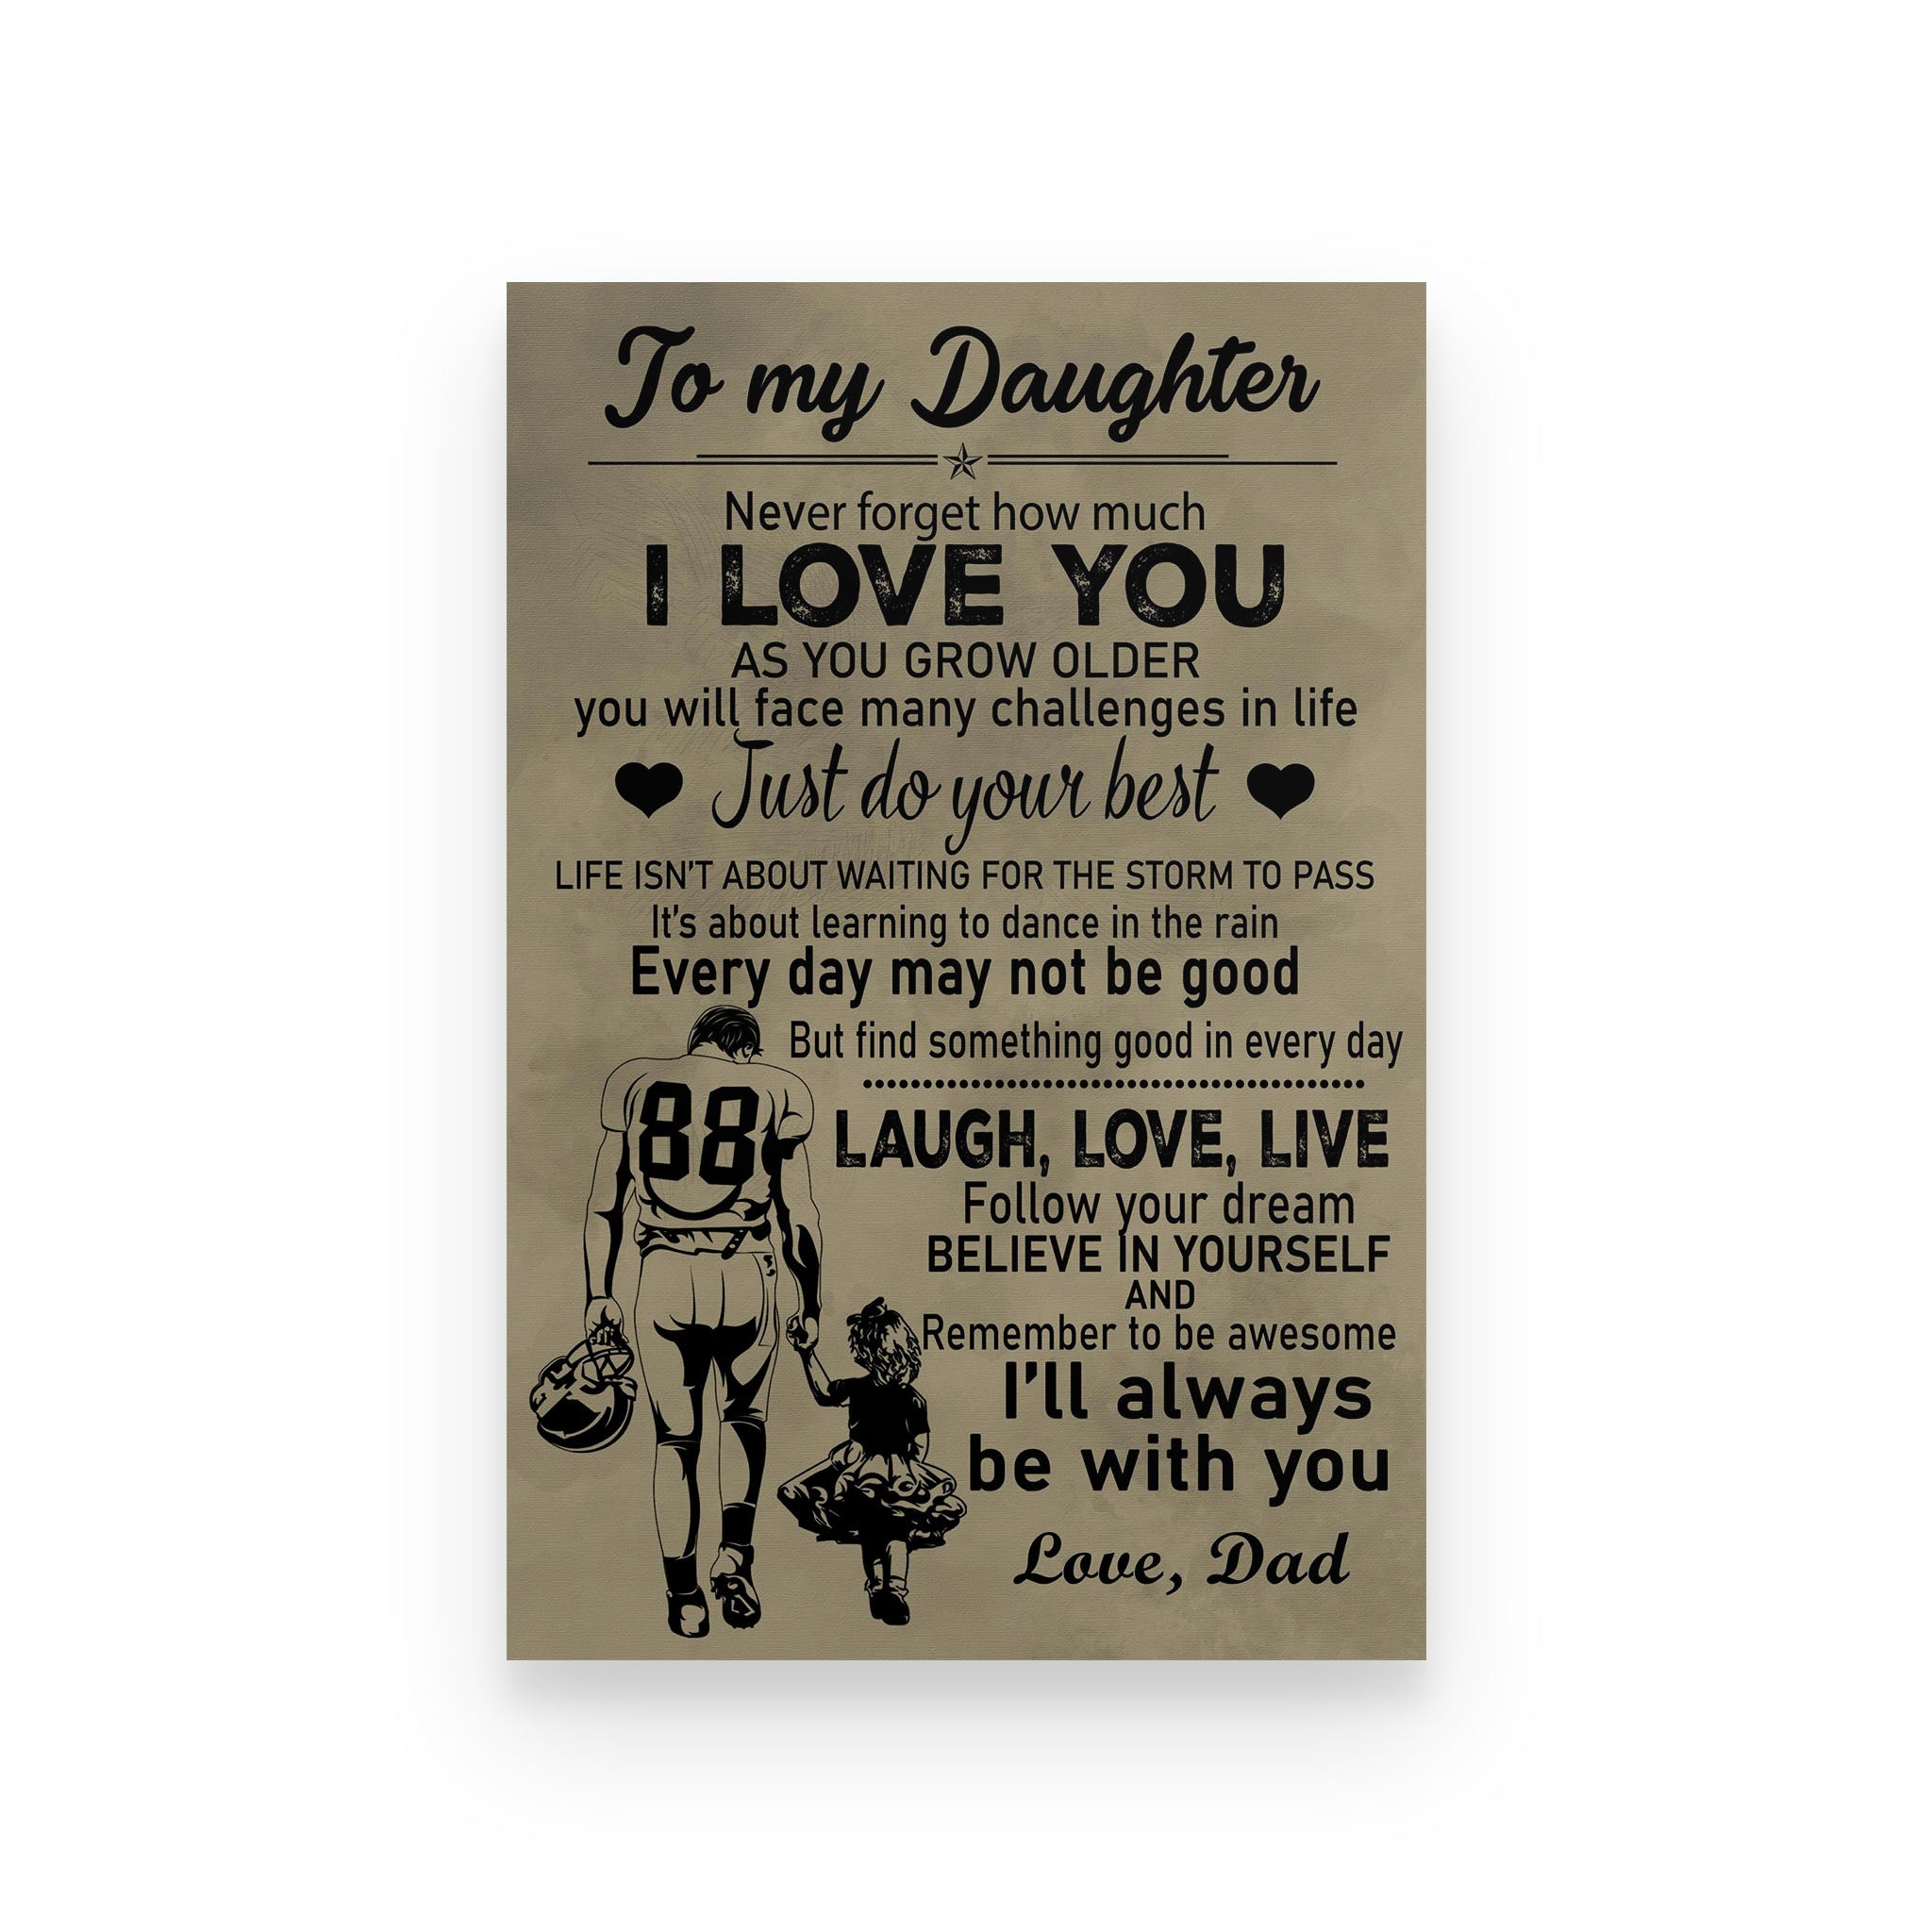 American football poster dad to daughter never forget how much I love you